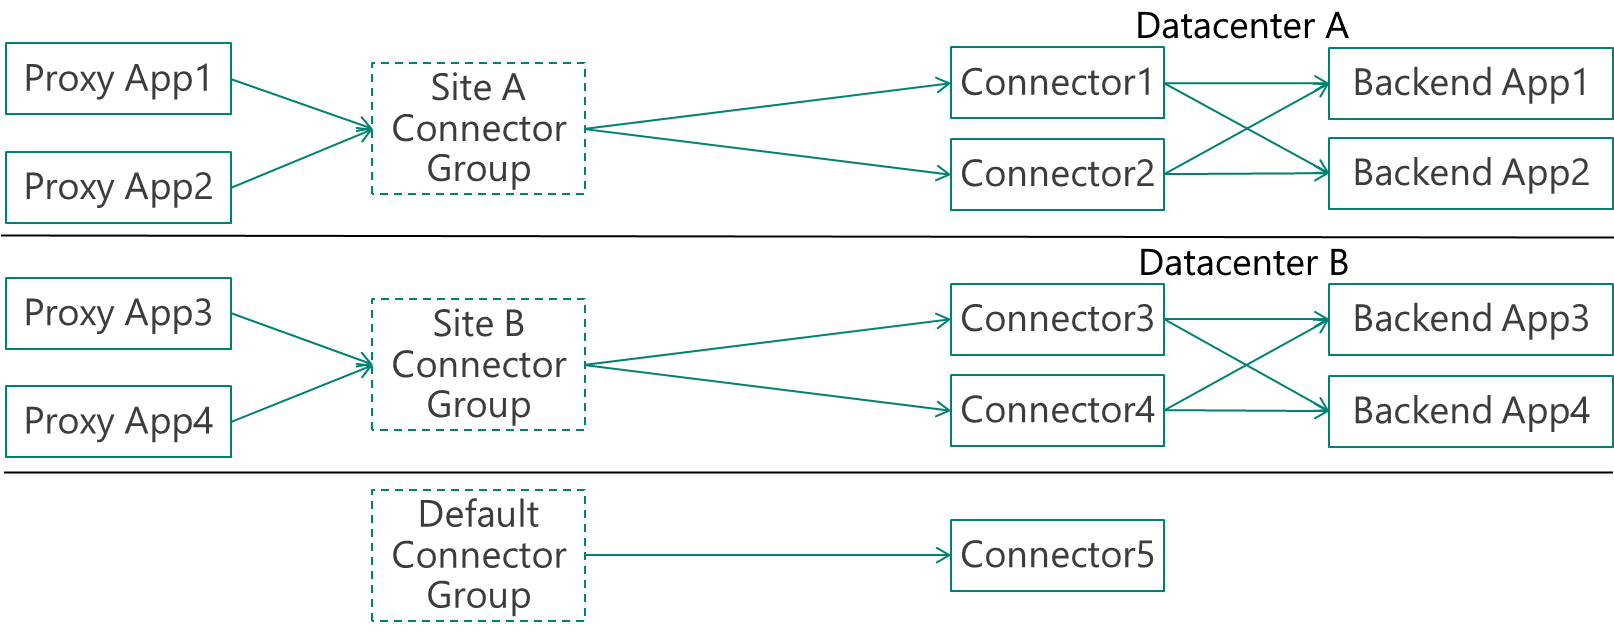 Example of company with 2 datacenters and 2 connectors